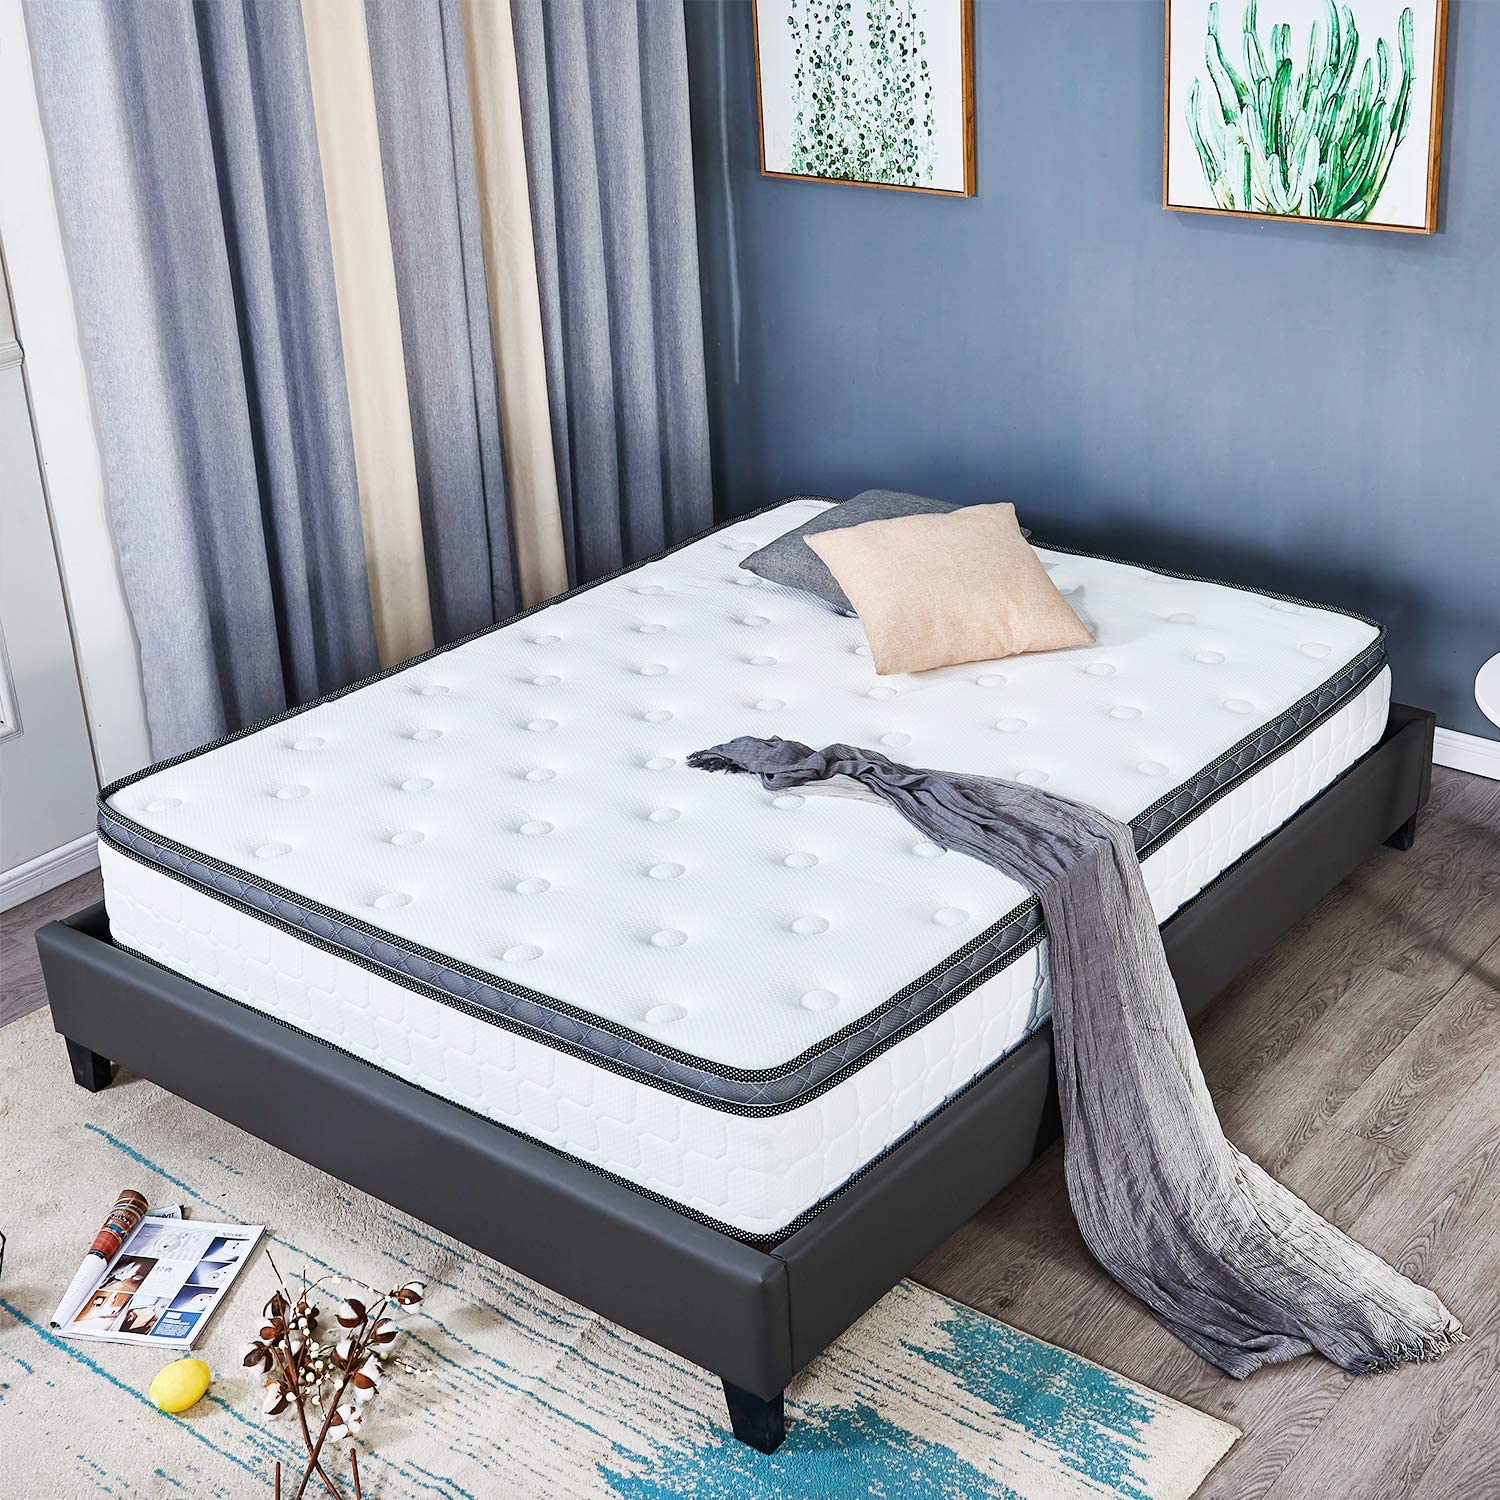 Lankou Breathable Bamboo with Pocket Sprung Mattresses